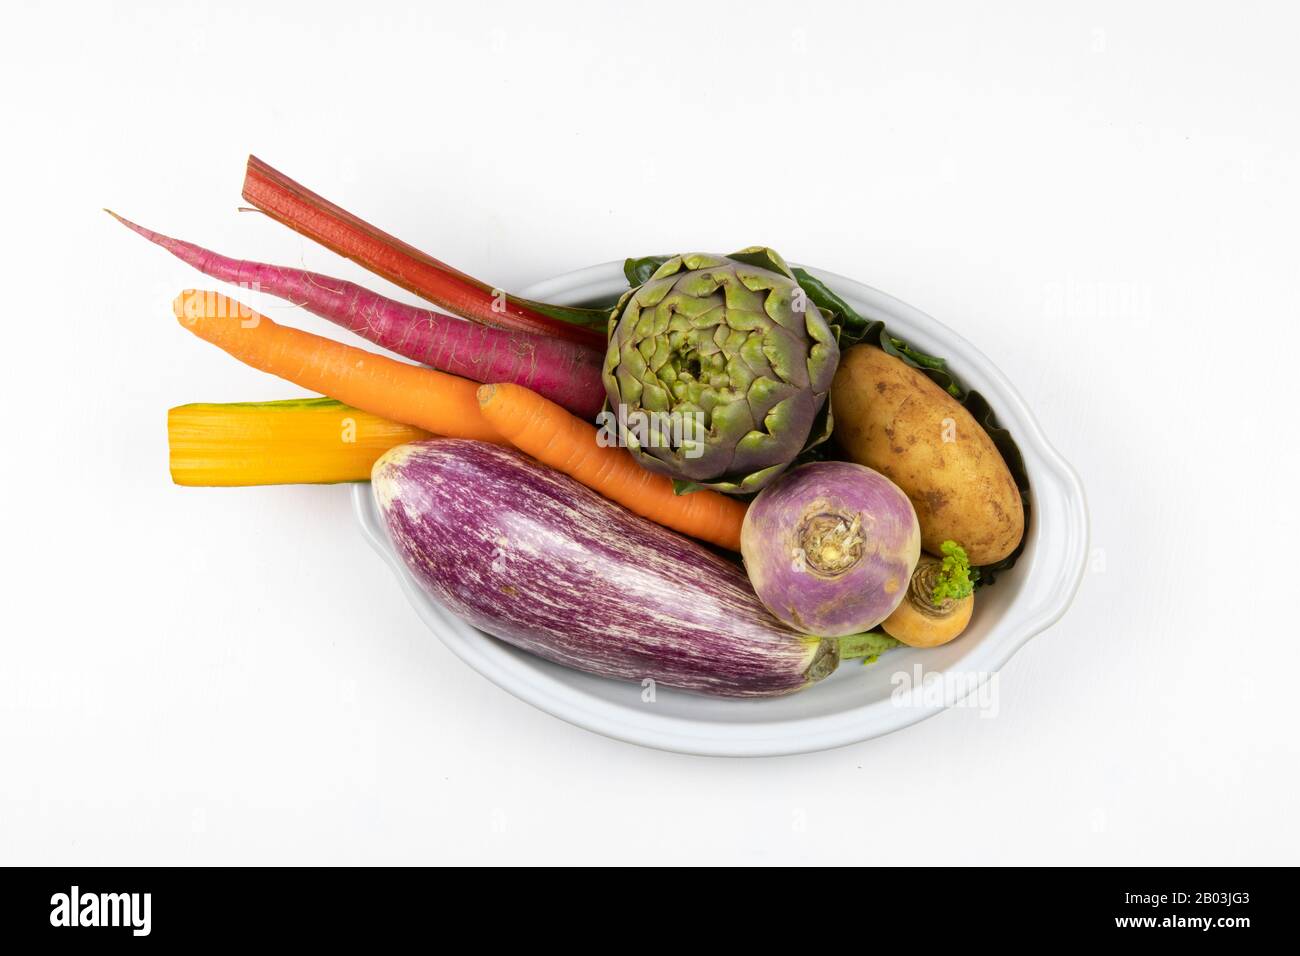 Composition of purple, orange and green vegetables in baking dish. Eggplant, potato, artichoke, carrot, colorful raw vegetables still life Stock Photo